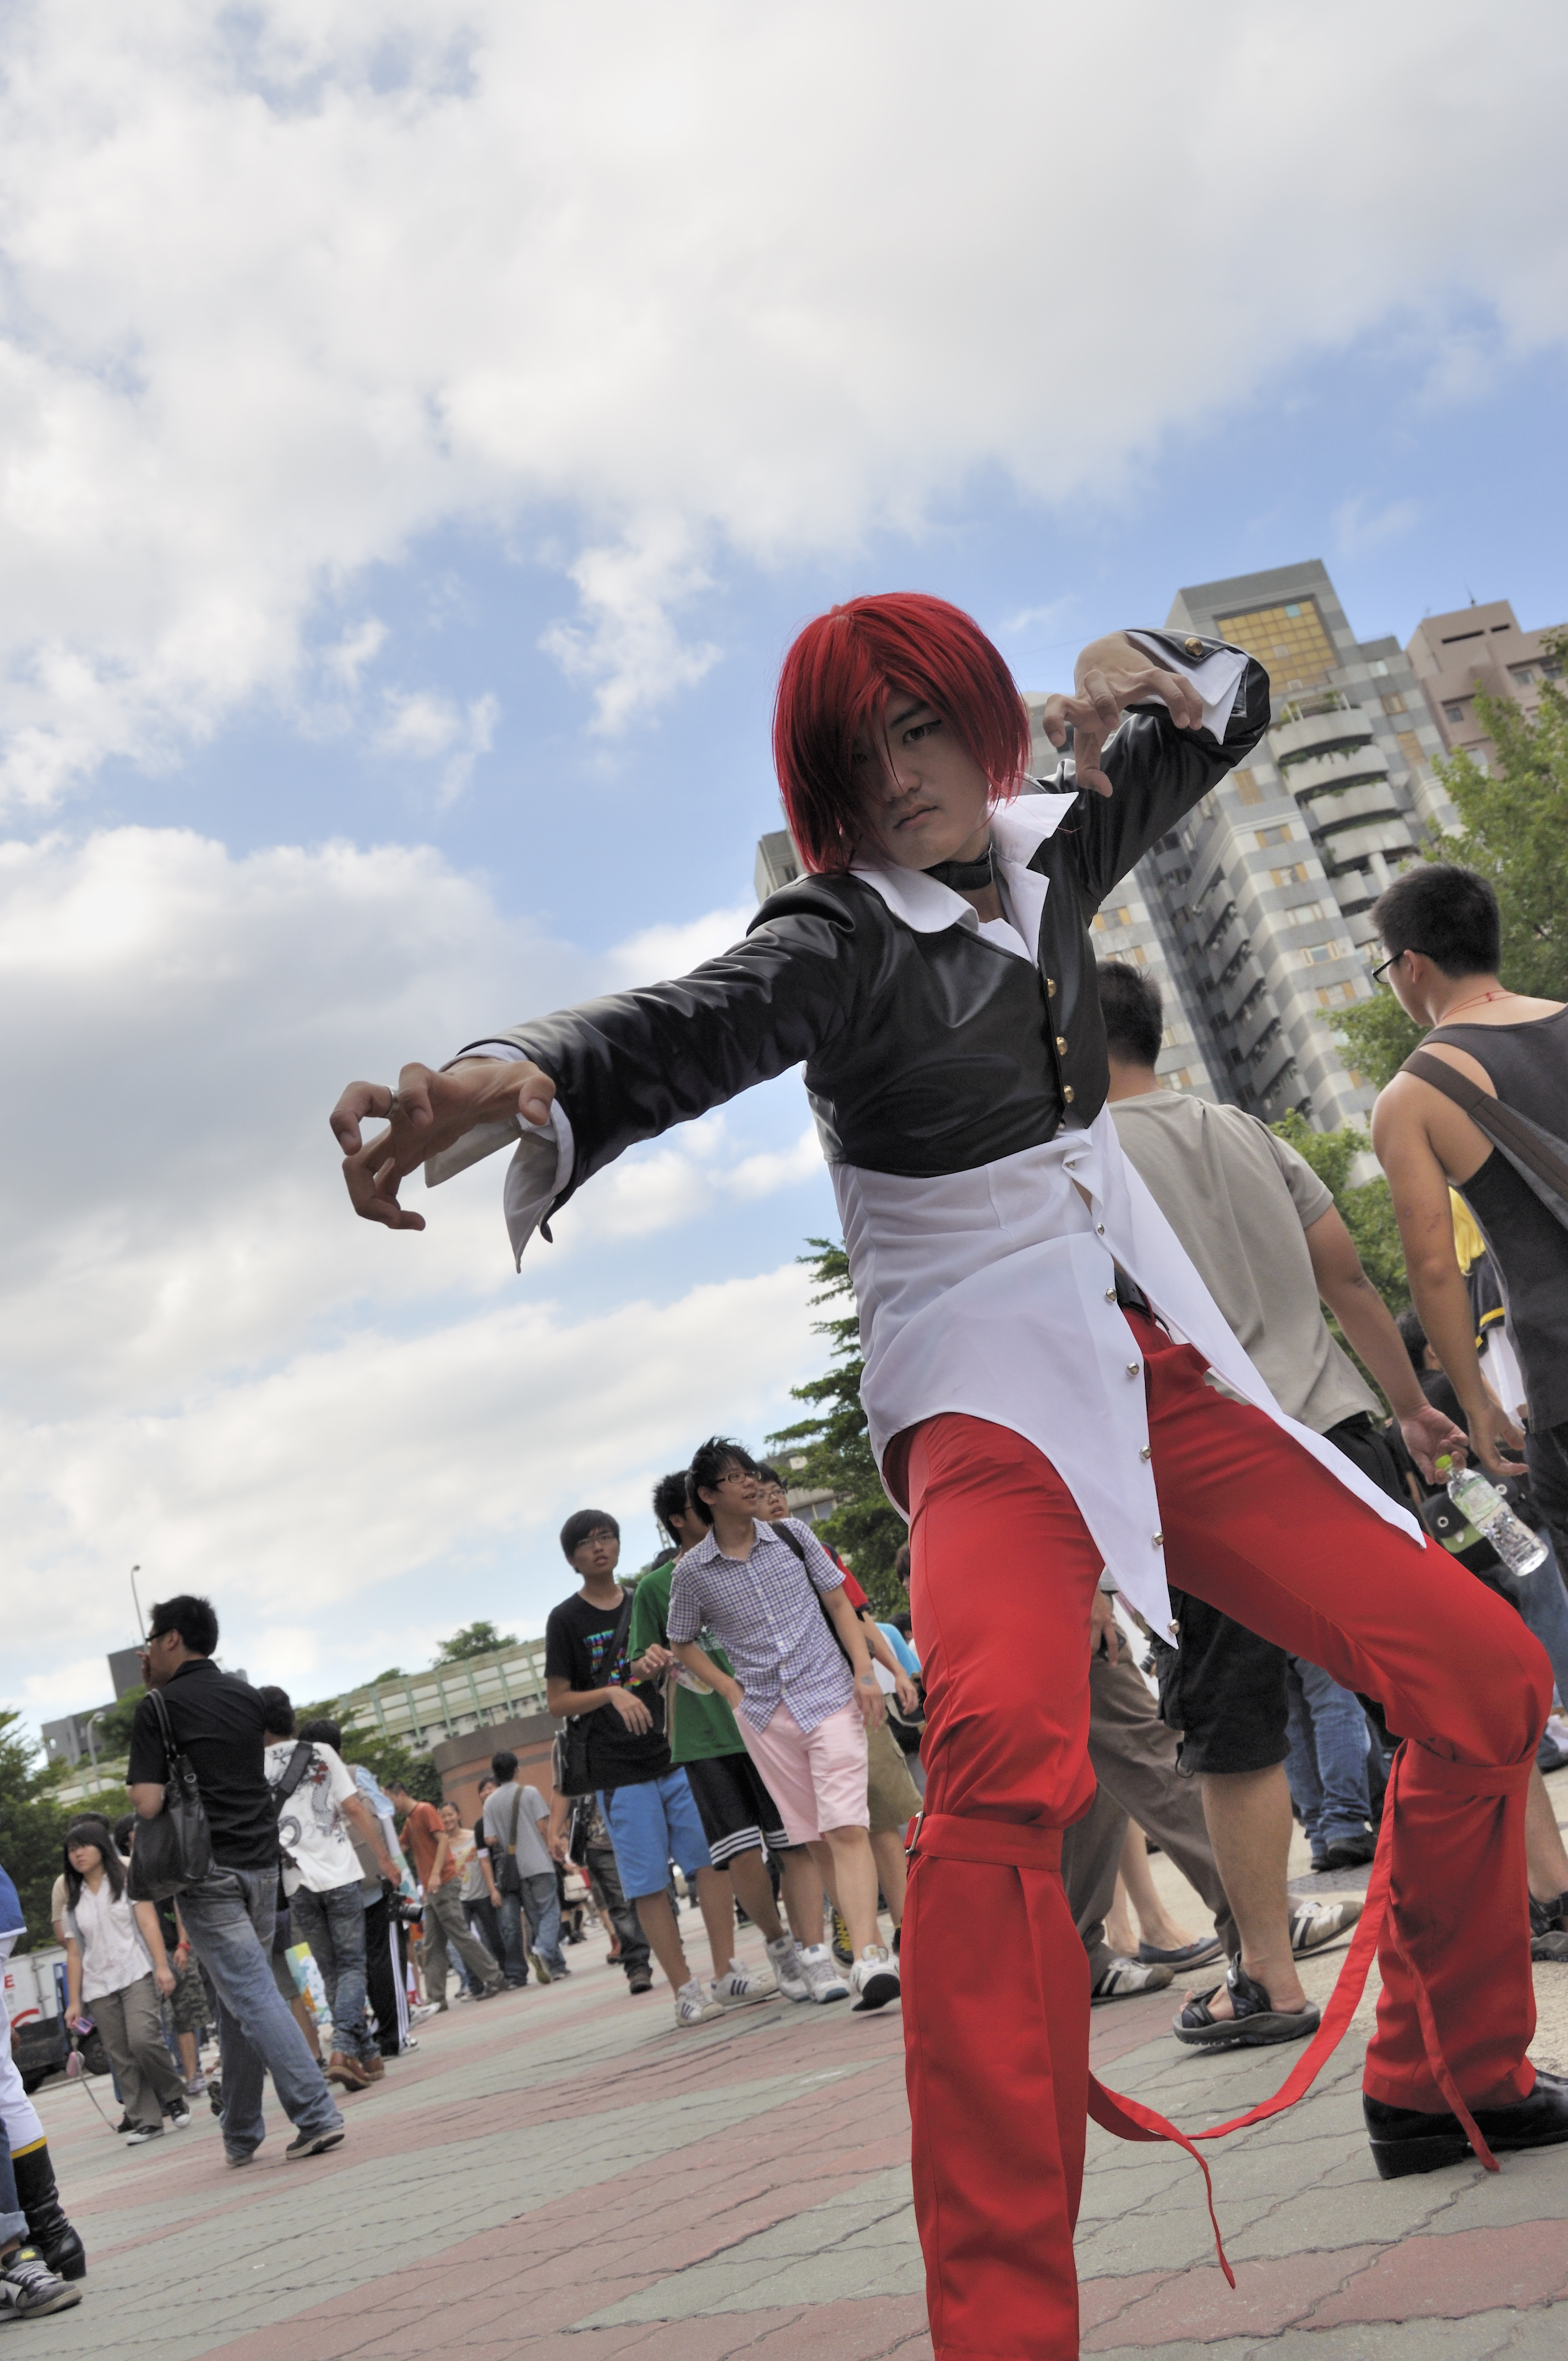 File:Cosplayer of Iori Yagami at CWT T13 20150322a.jpg - Wikimedia Commons